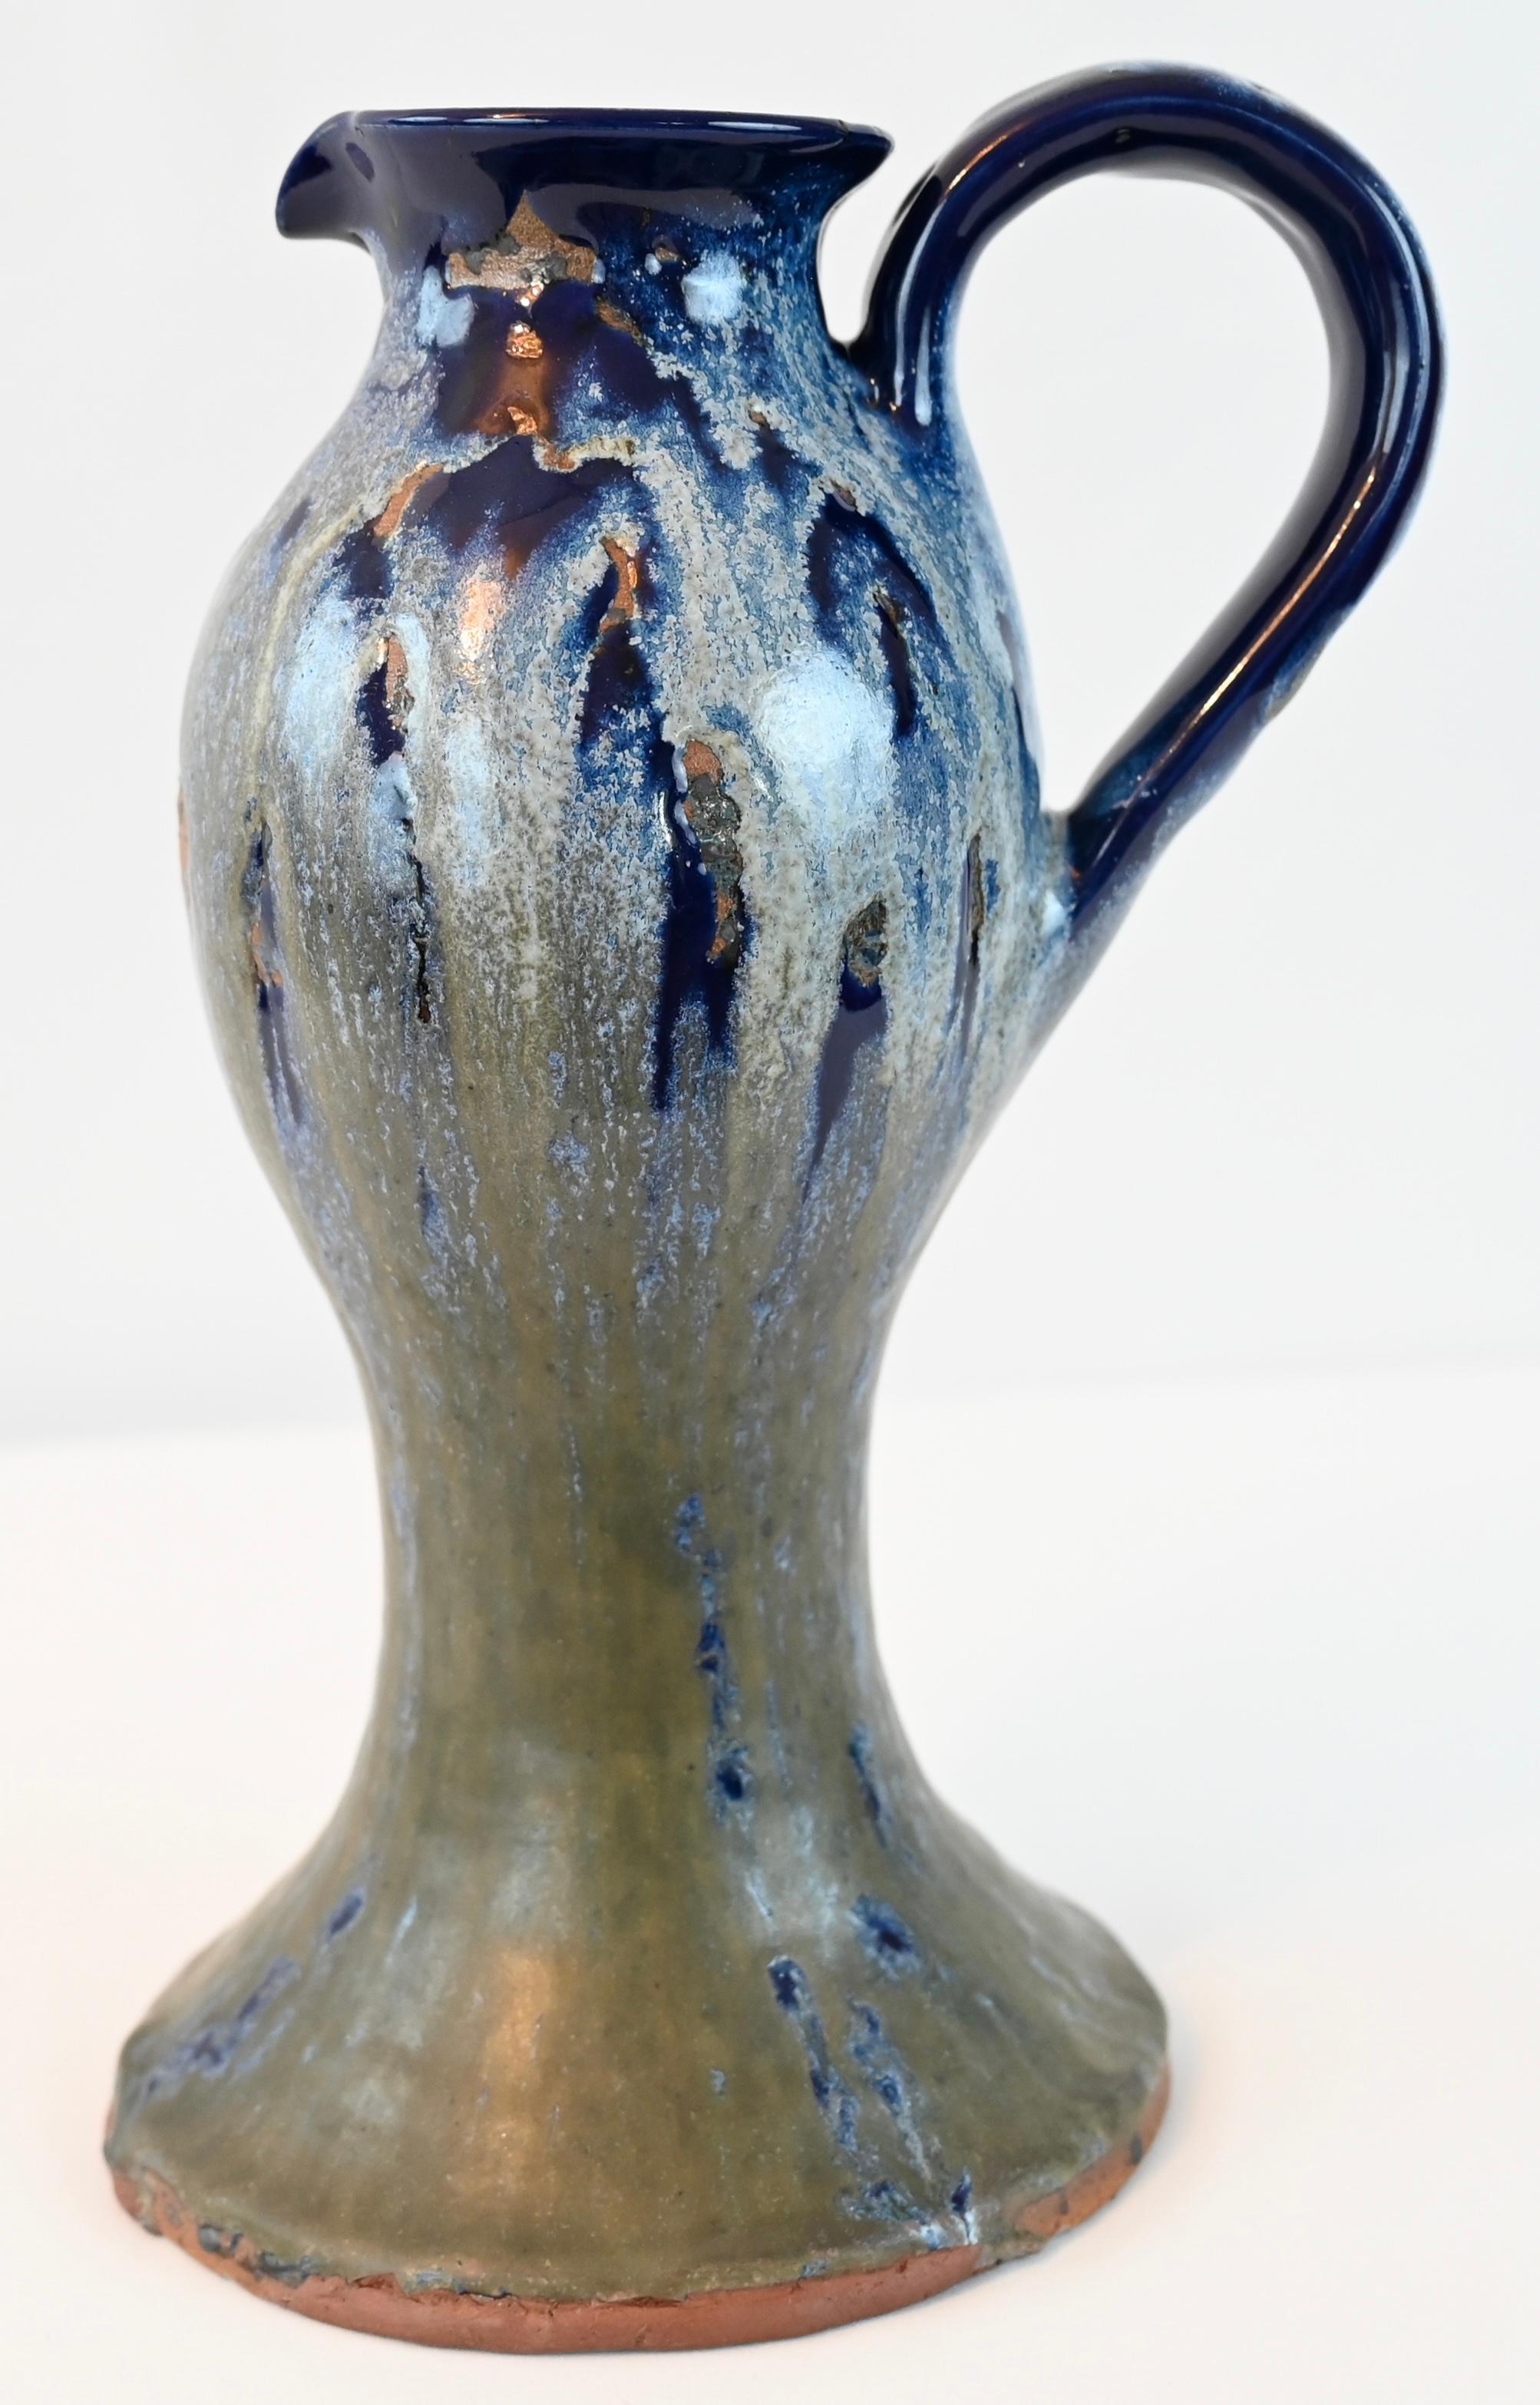 Hand-Crafted French Art Nouveau Ceramic Vase in a Pitcher Form Attrib. to Charles Gerber For Sale